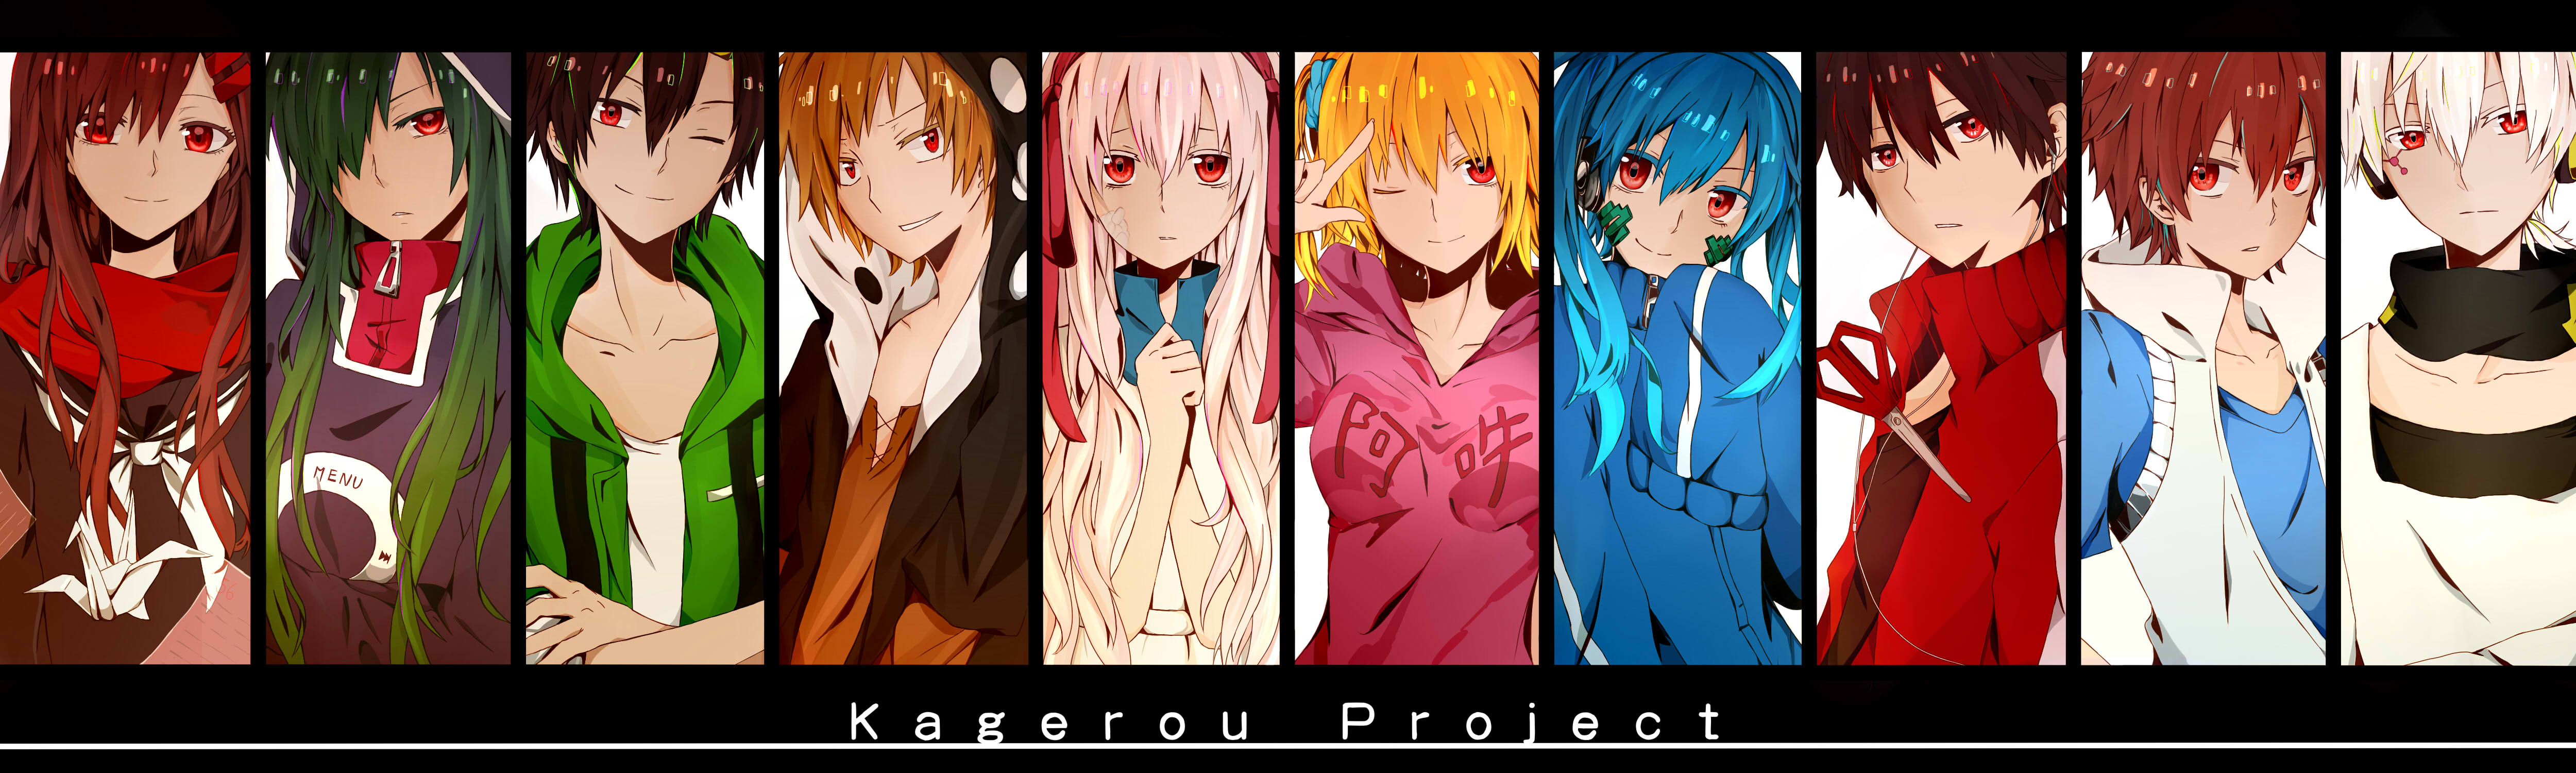 Mekakucity Actors[] Kagerou Project Characters by